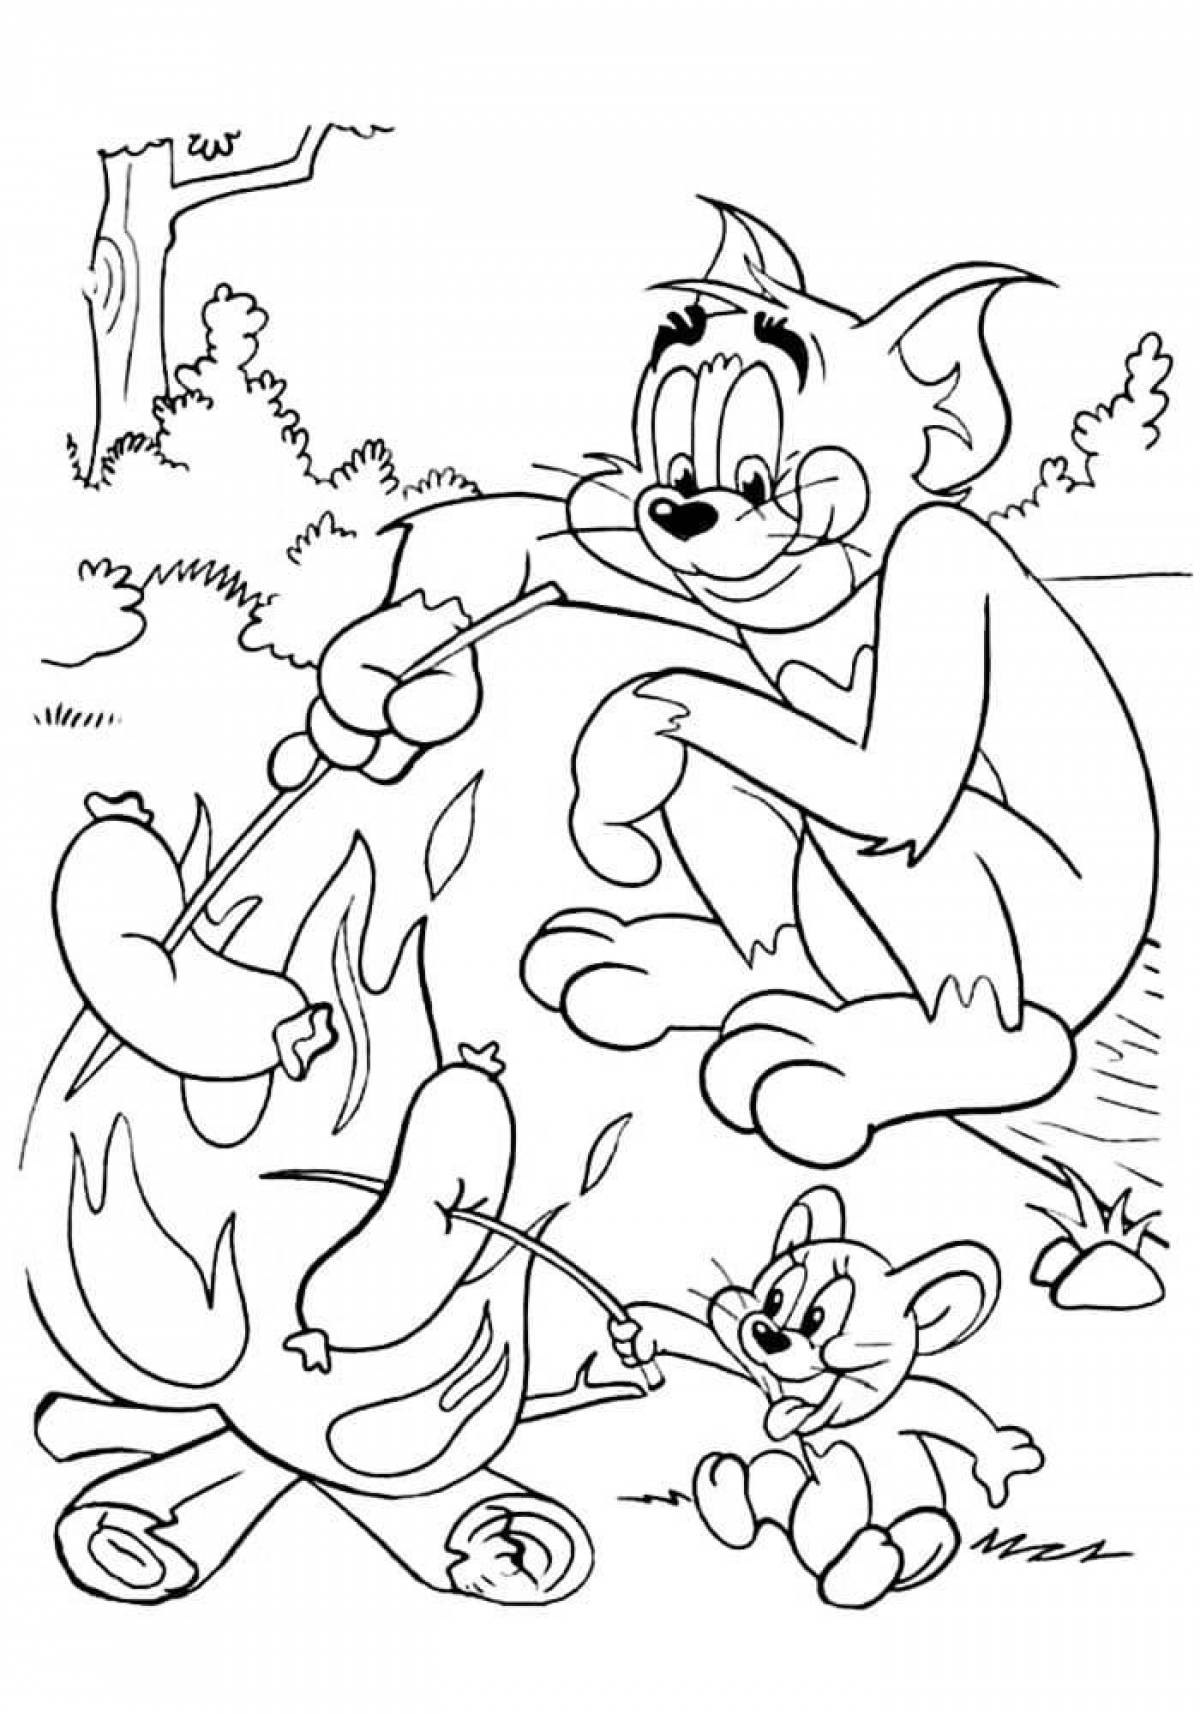 Bright tom and jerry coloring pages for kids